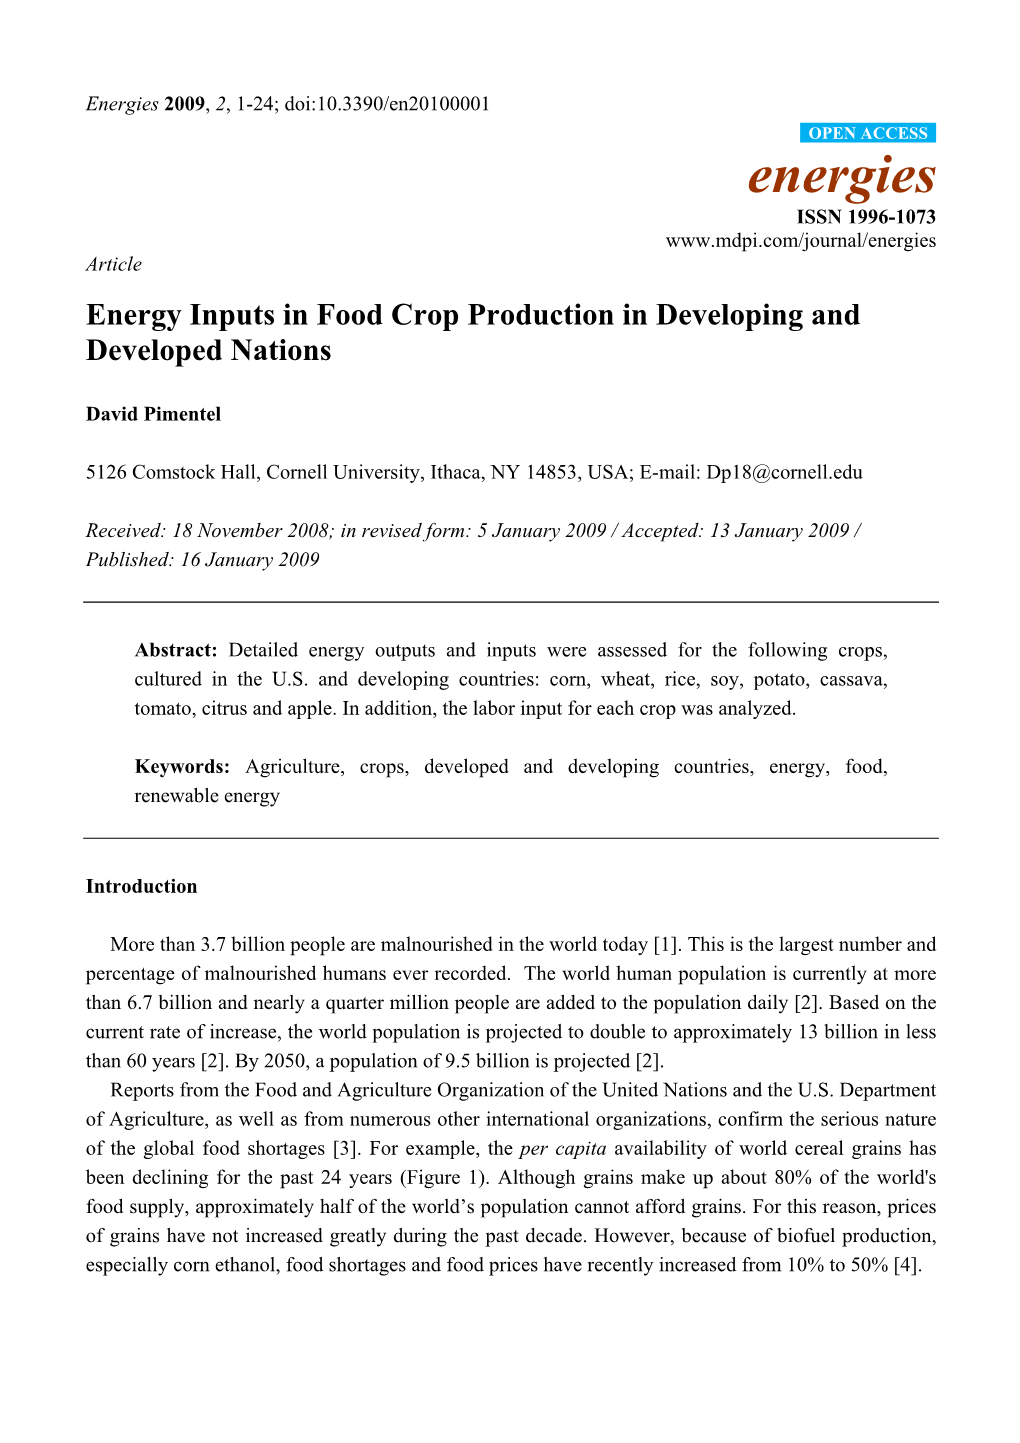 Energy Inputs in Food Crop Production in Developing and Developed Nations